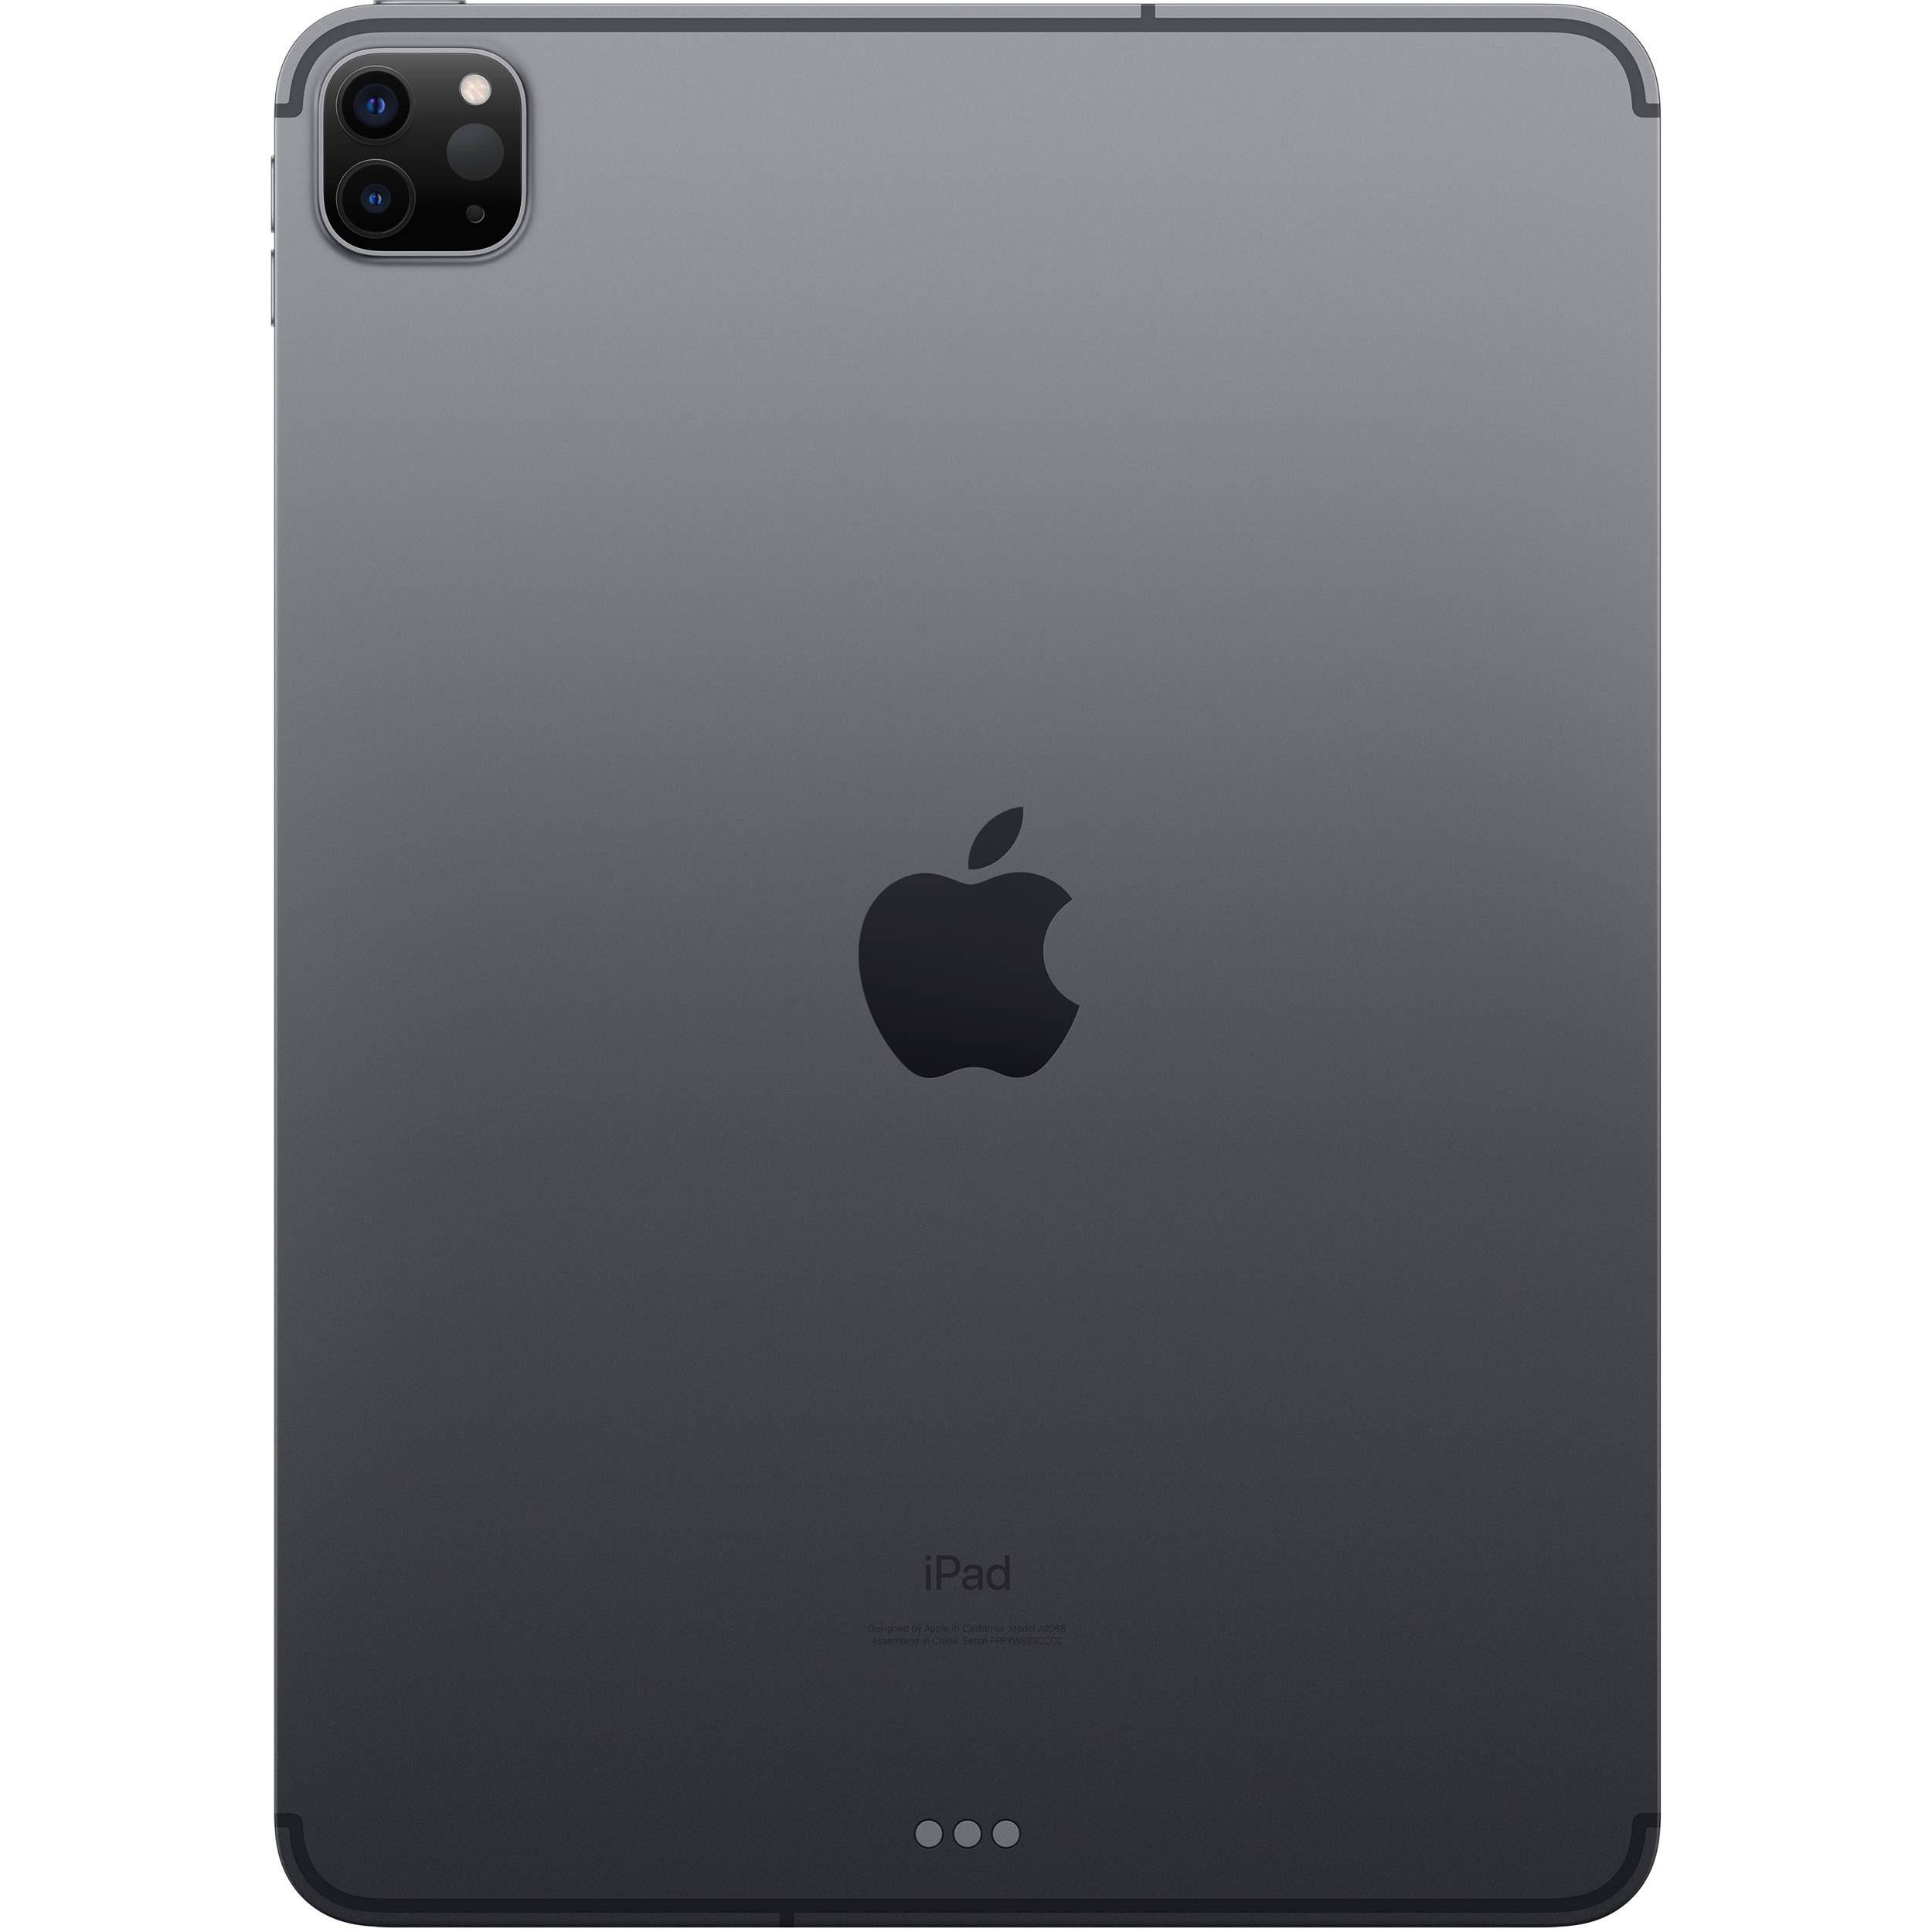 Restored Apple iPad Pro 11" 4th Gen. Space Gray 128GB WiFi + Cellular Tablet (Refurbished) - image 3 of 5